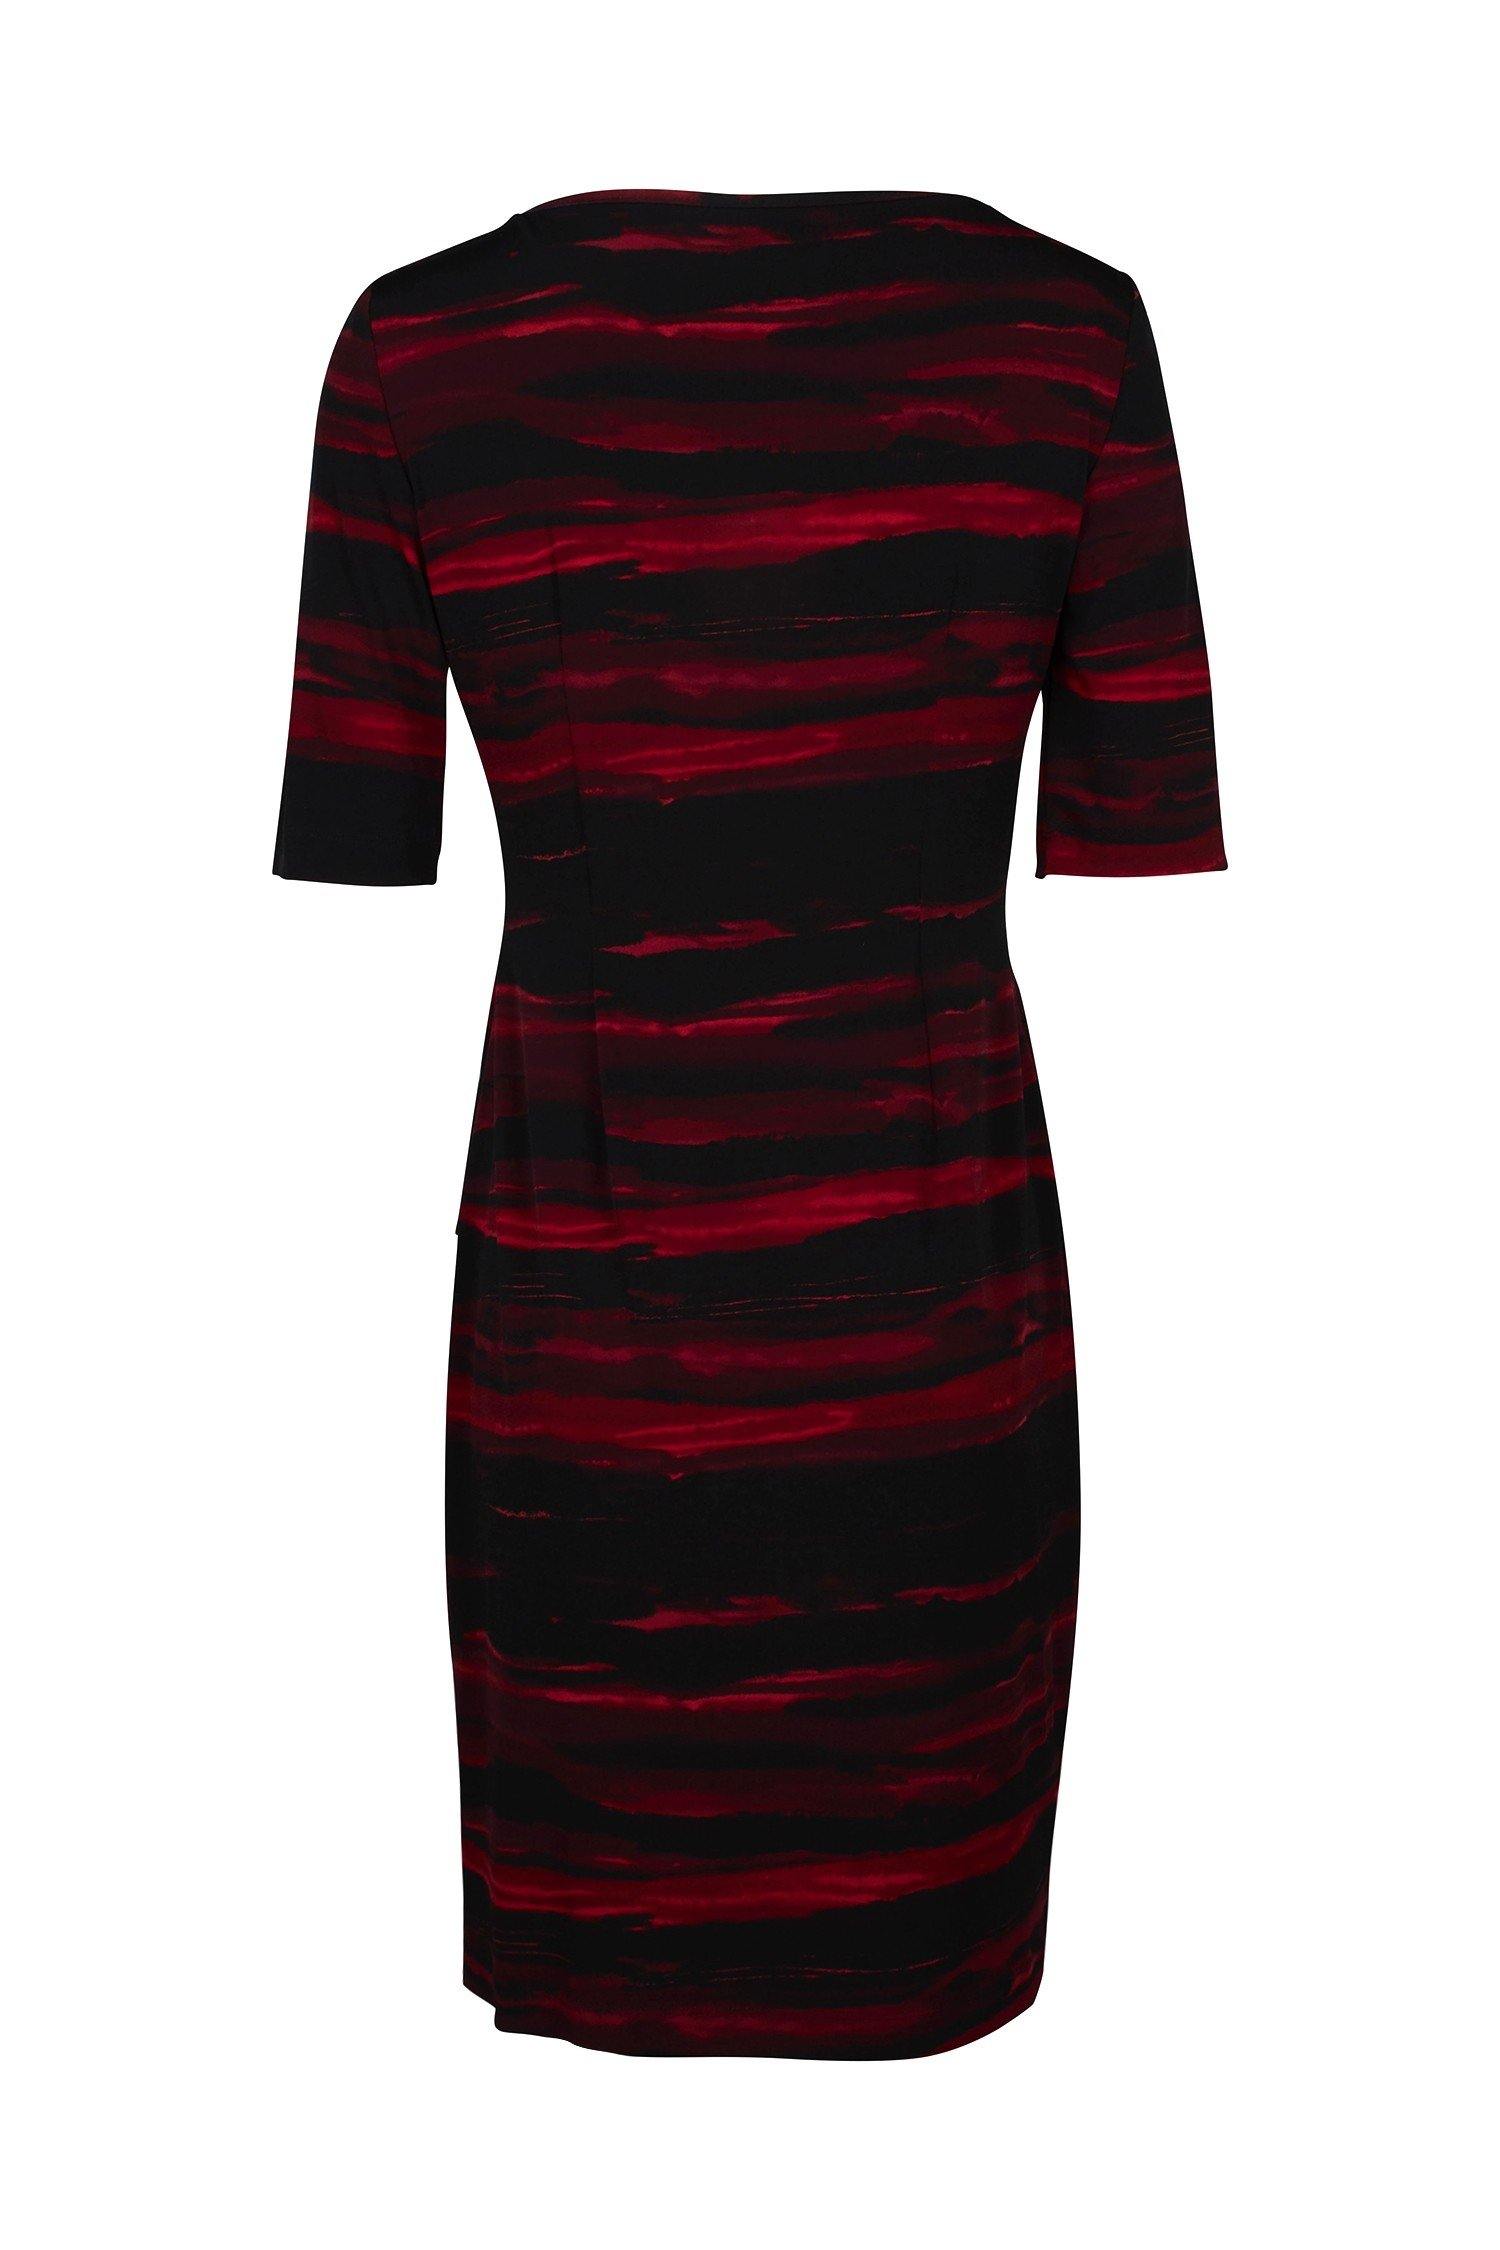 Connected Apparel Short Sleeve Tiered Print Dress - The Dress Outlet